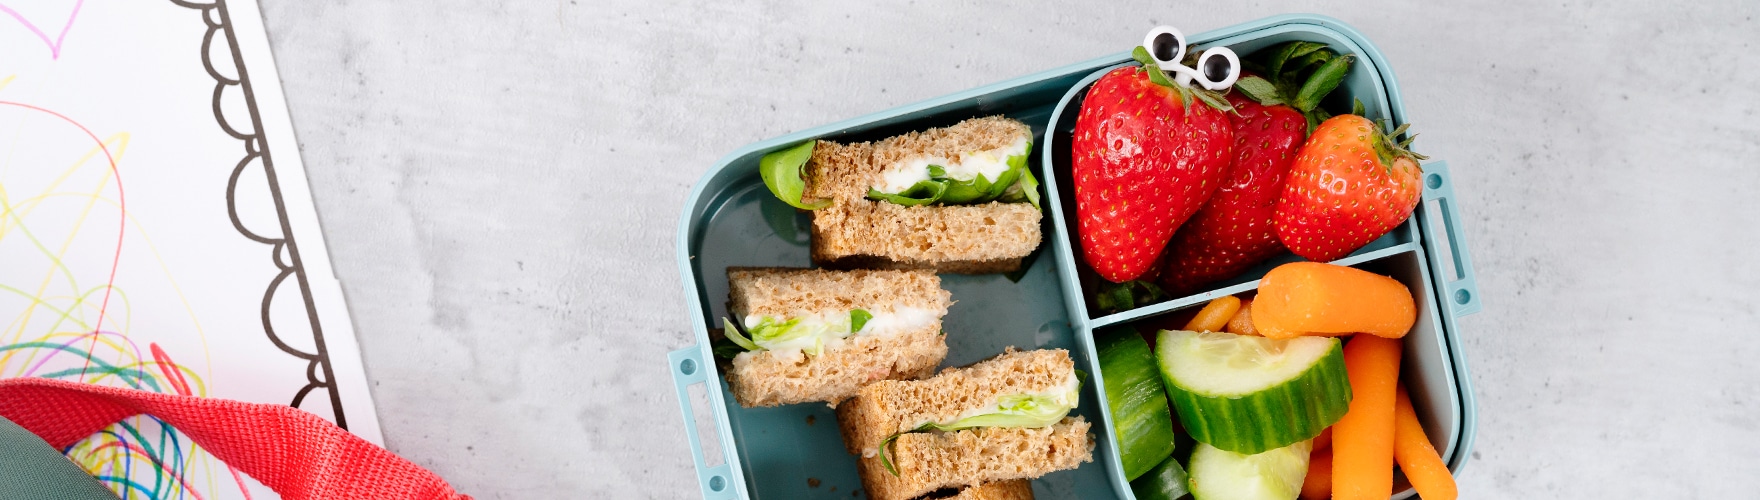 Kids’ lunch box with strawberries, cucumber, carrot and cheese spread sandwiches